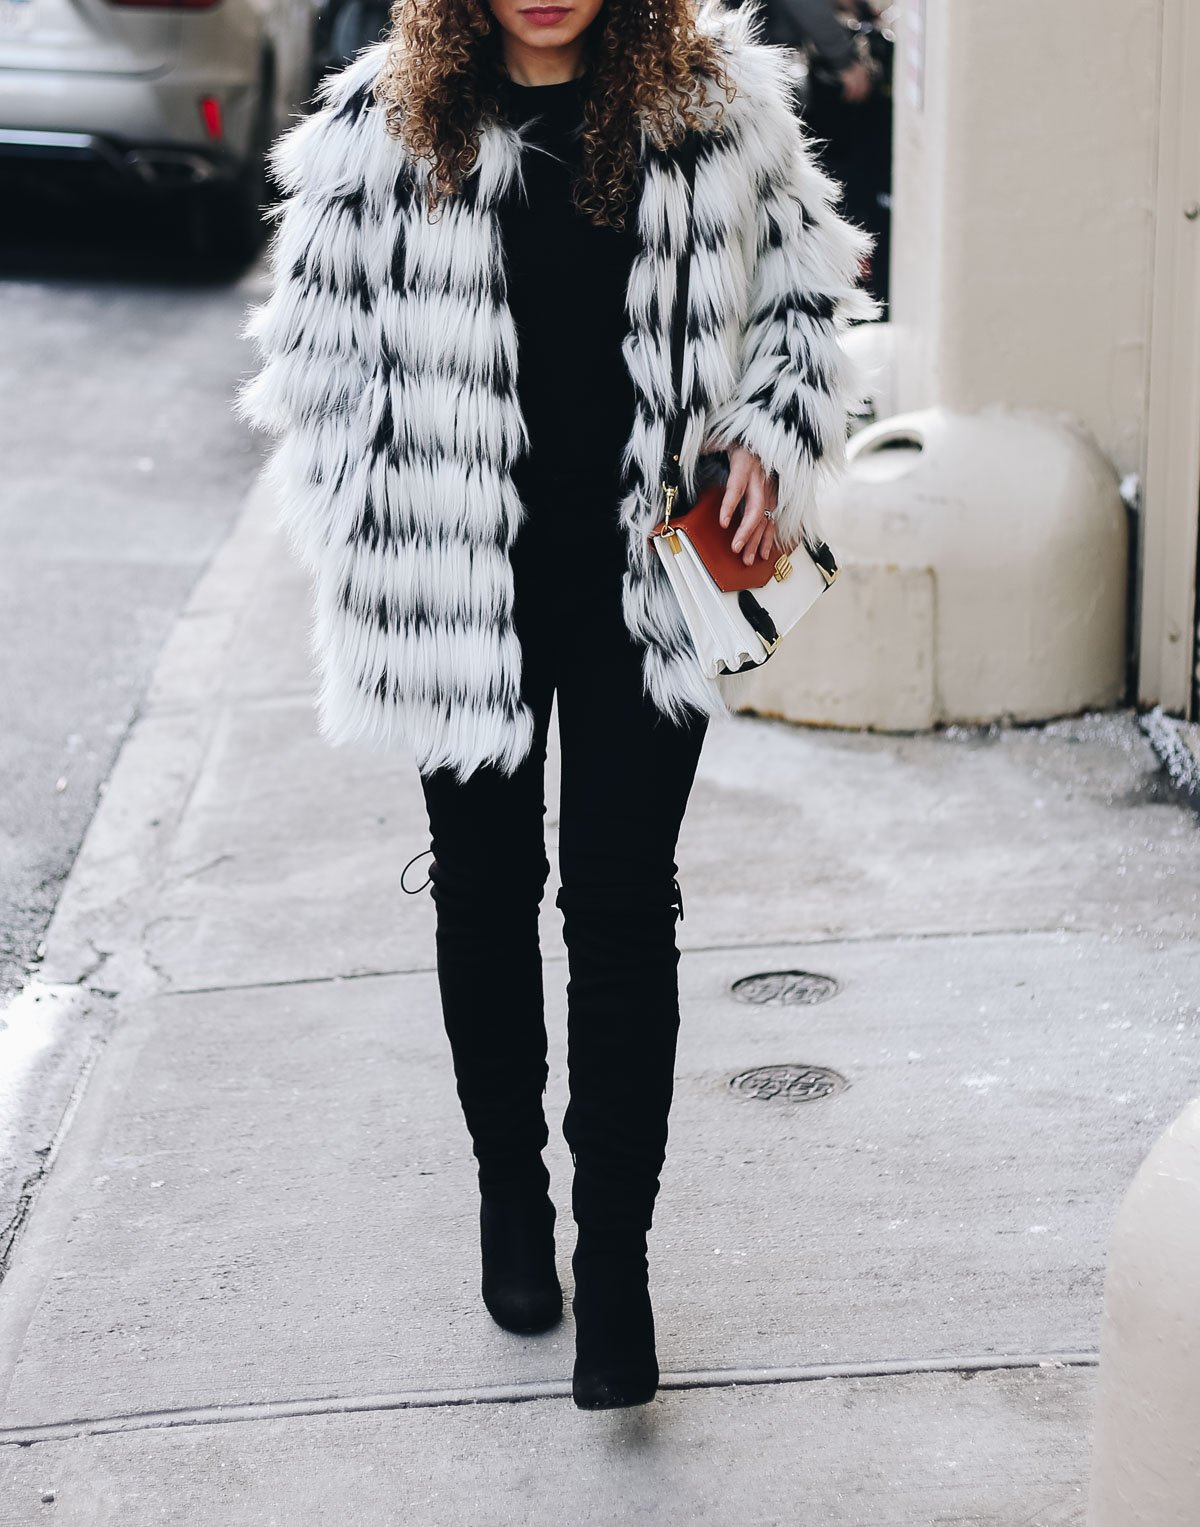 Faux fur statement coat to complete your winter travel outfit!